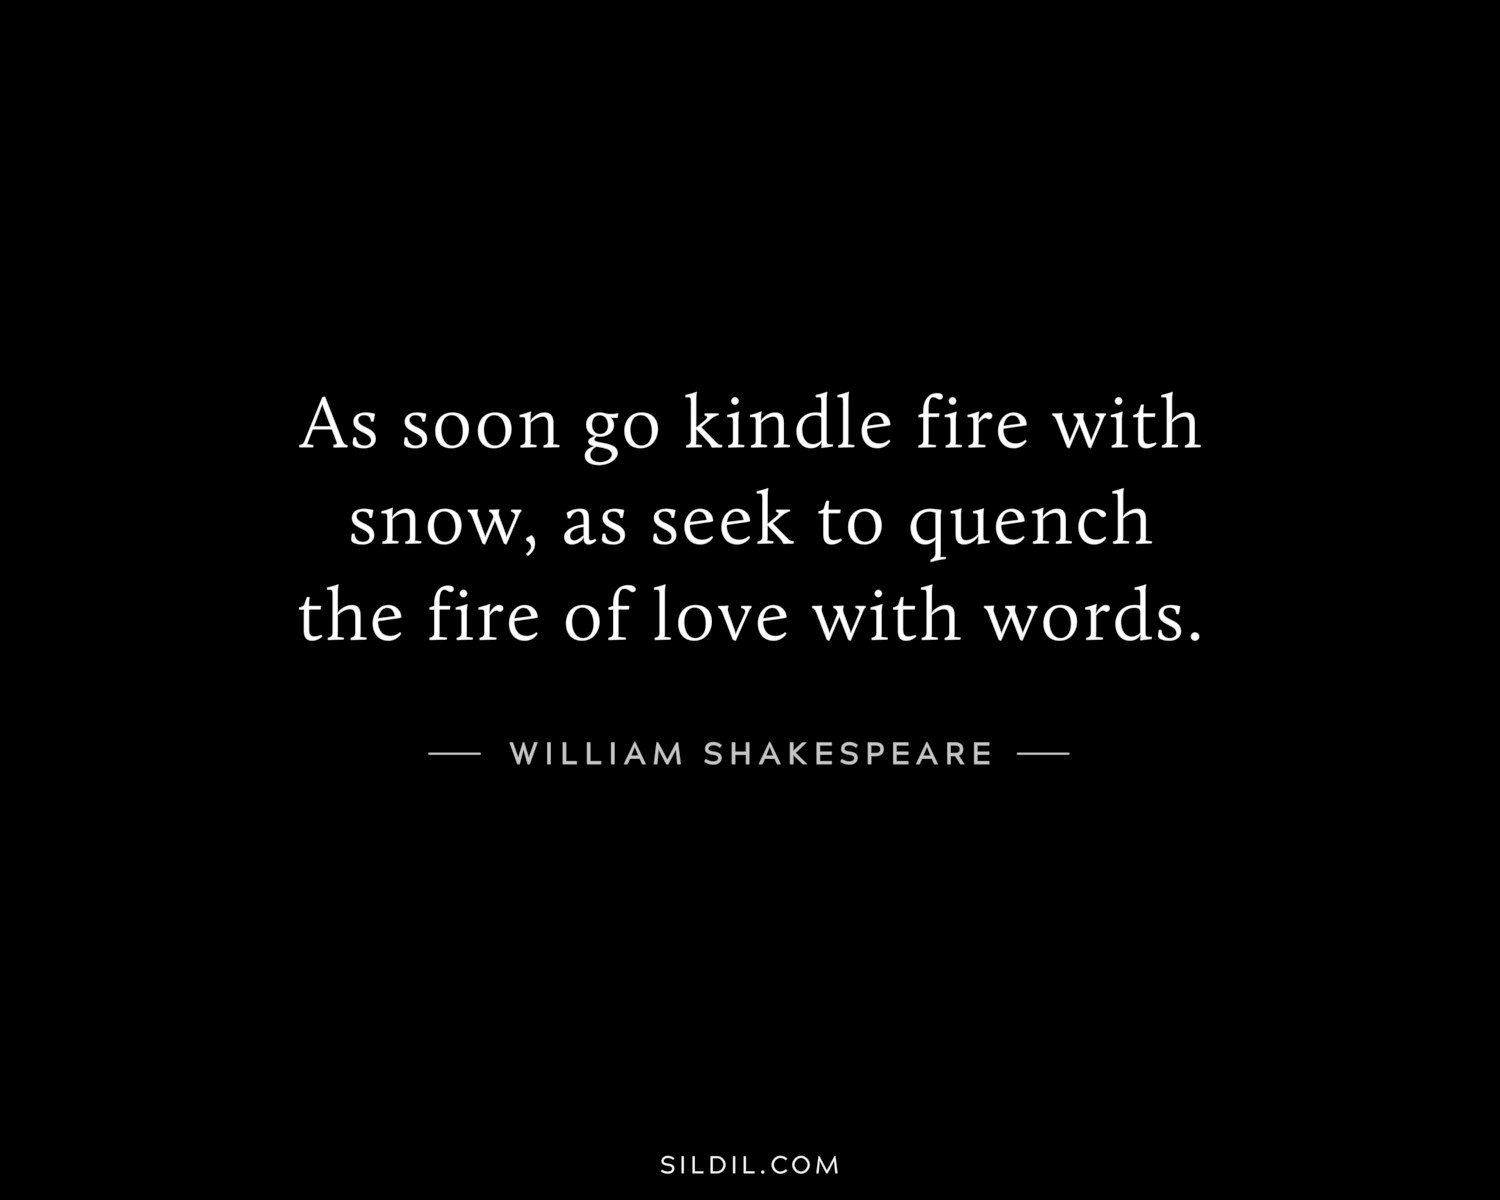 As soon go kindle fire with snow, as seek to quench the fire of love with words.